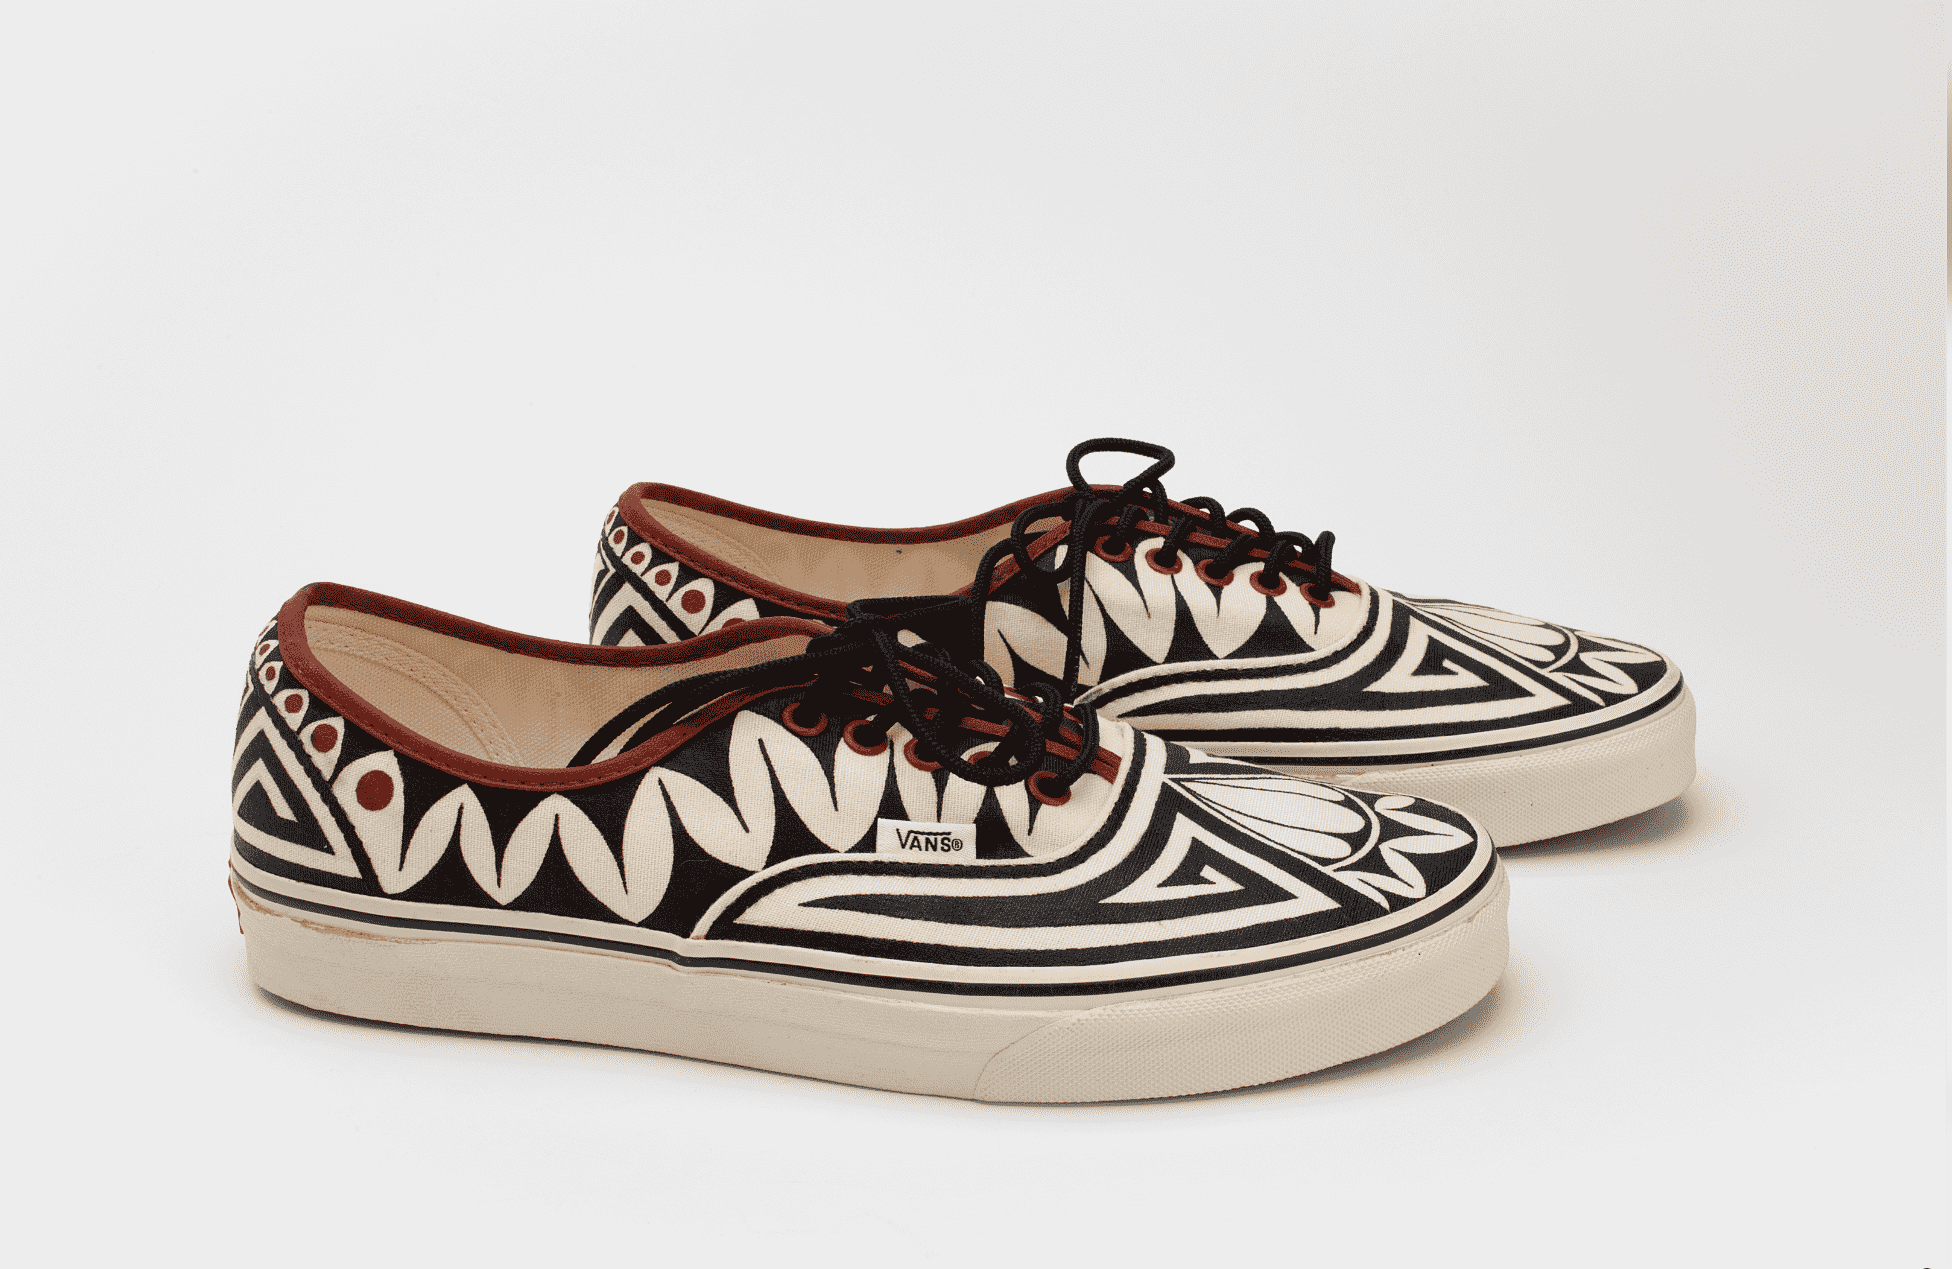 A pair of shoes with a pattern on it.